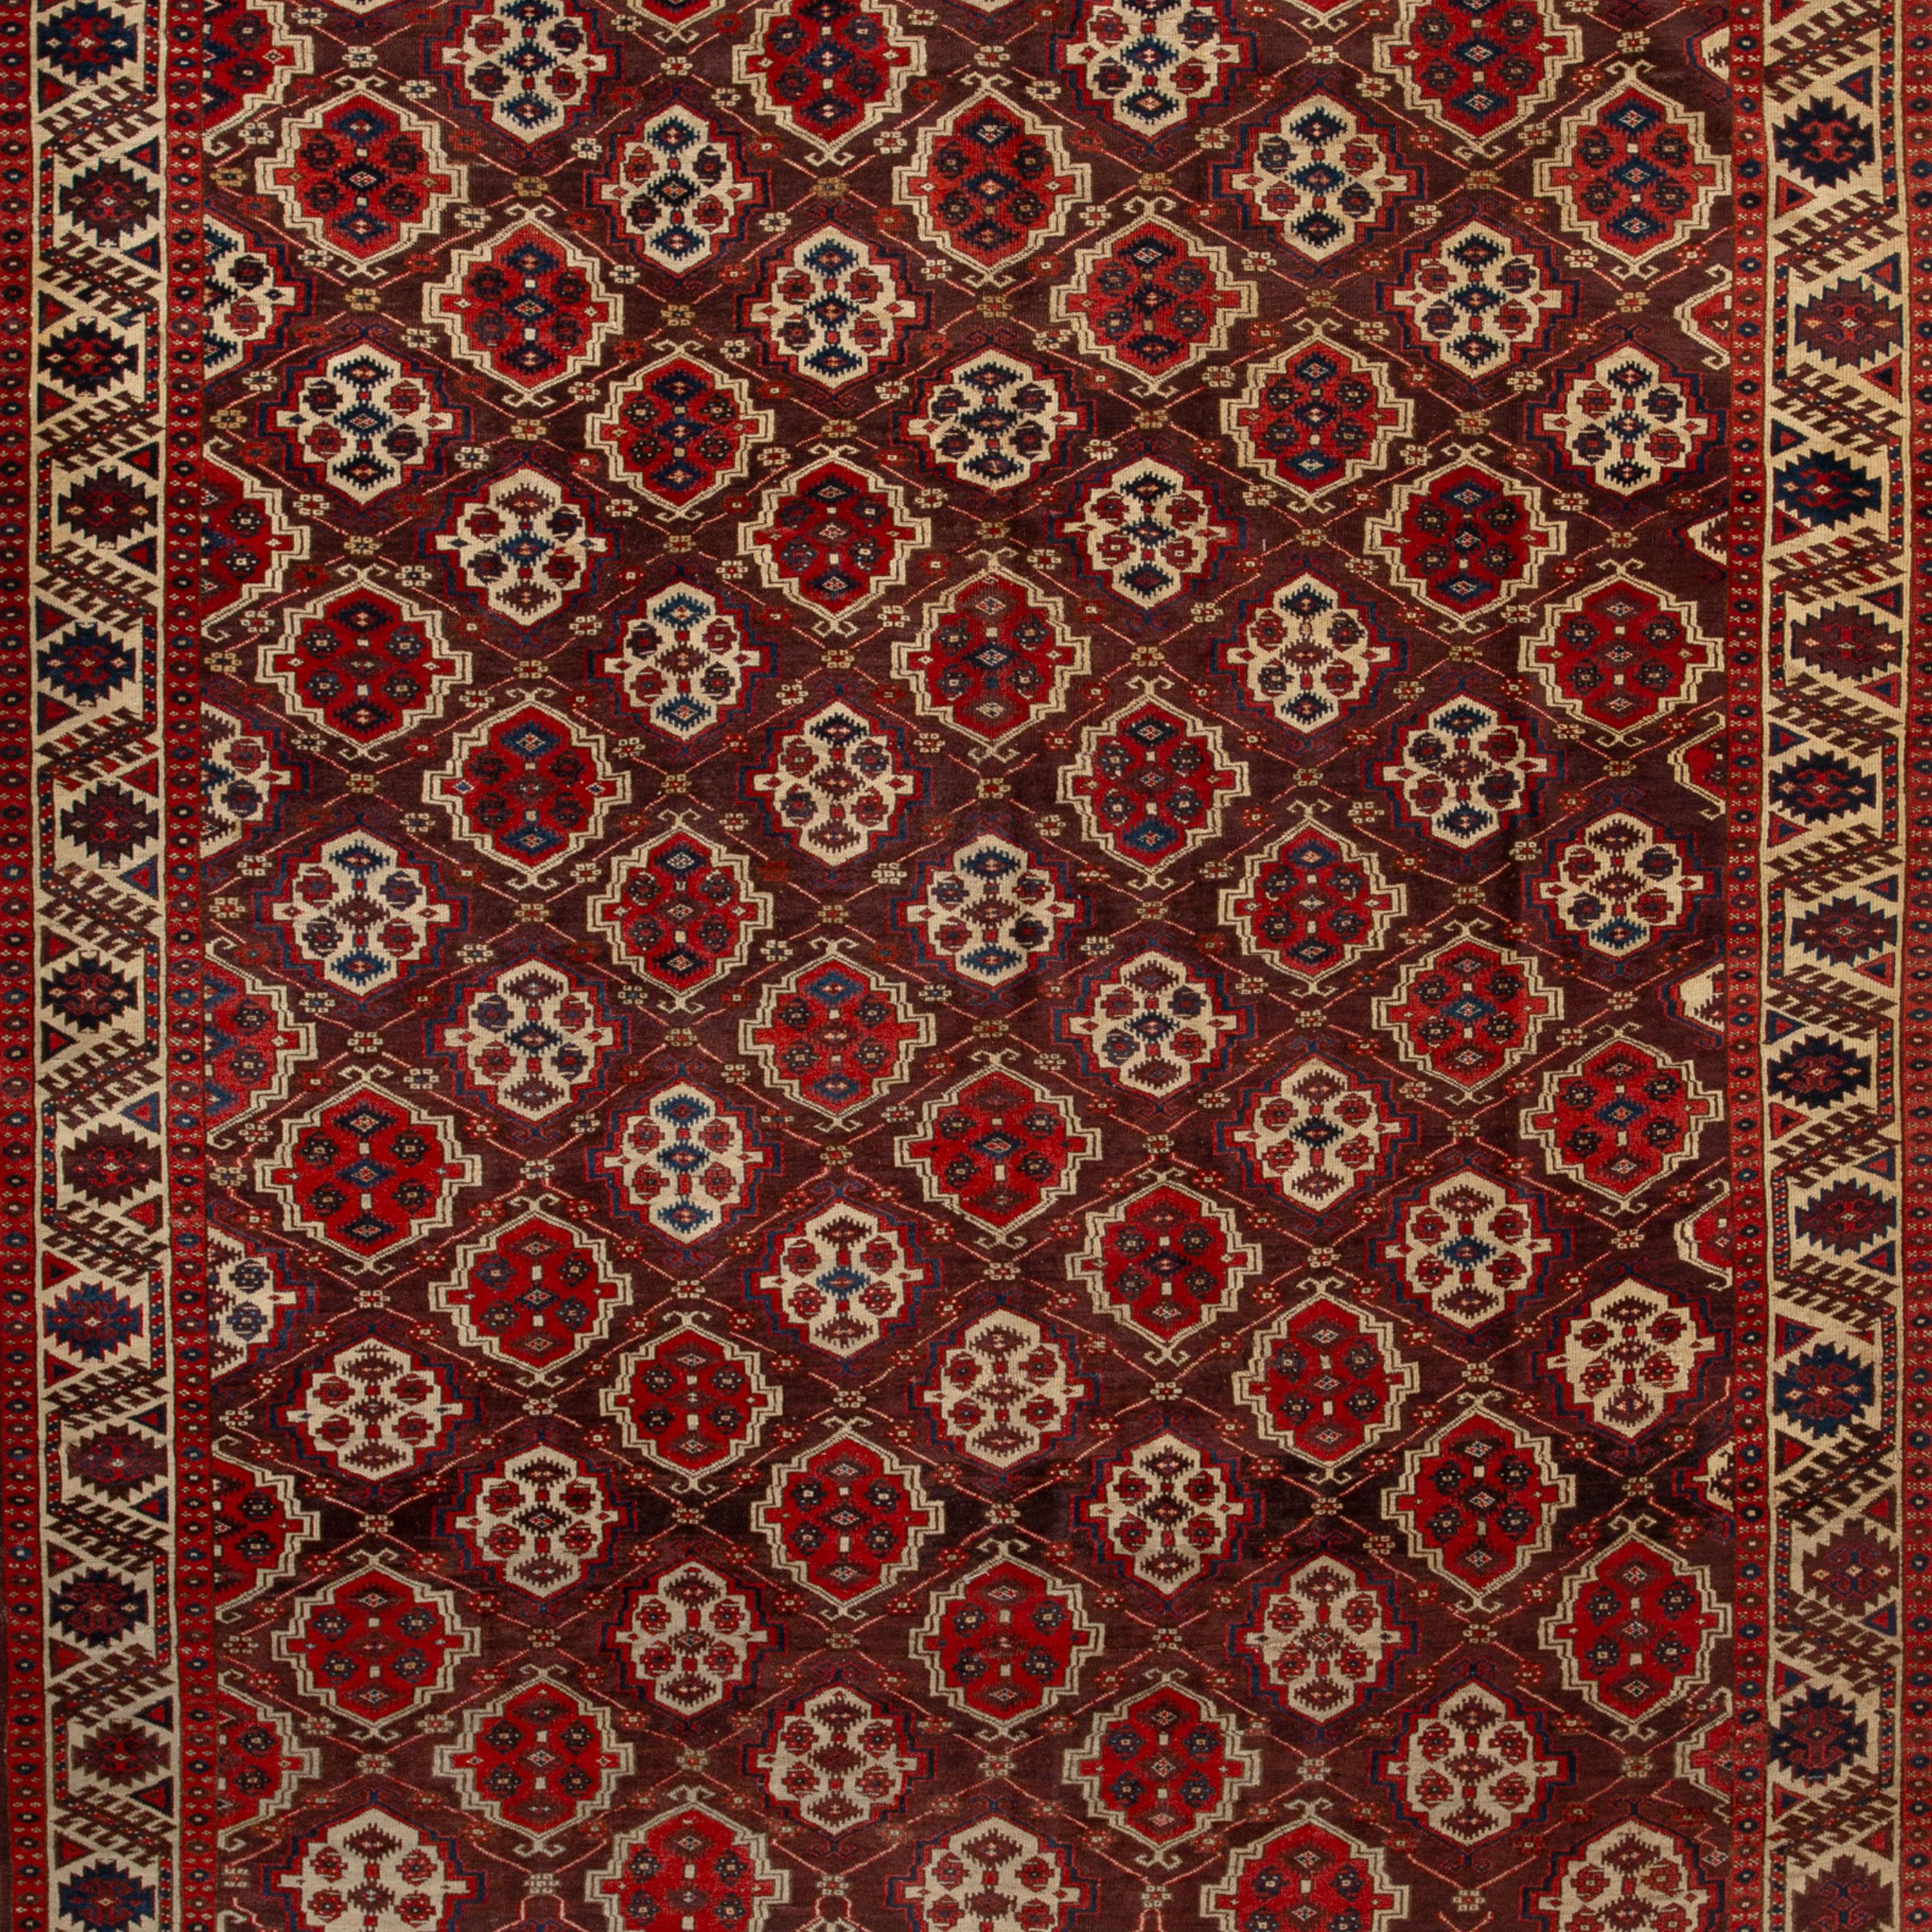 Featuring an intricate pattern in a classic red color palette, this hand-knotted Vintage Wool Rug - 7'2